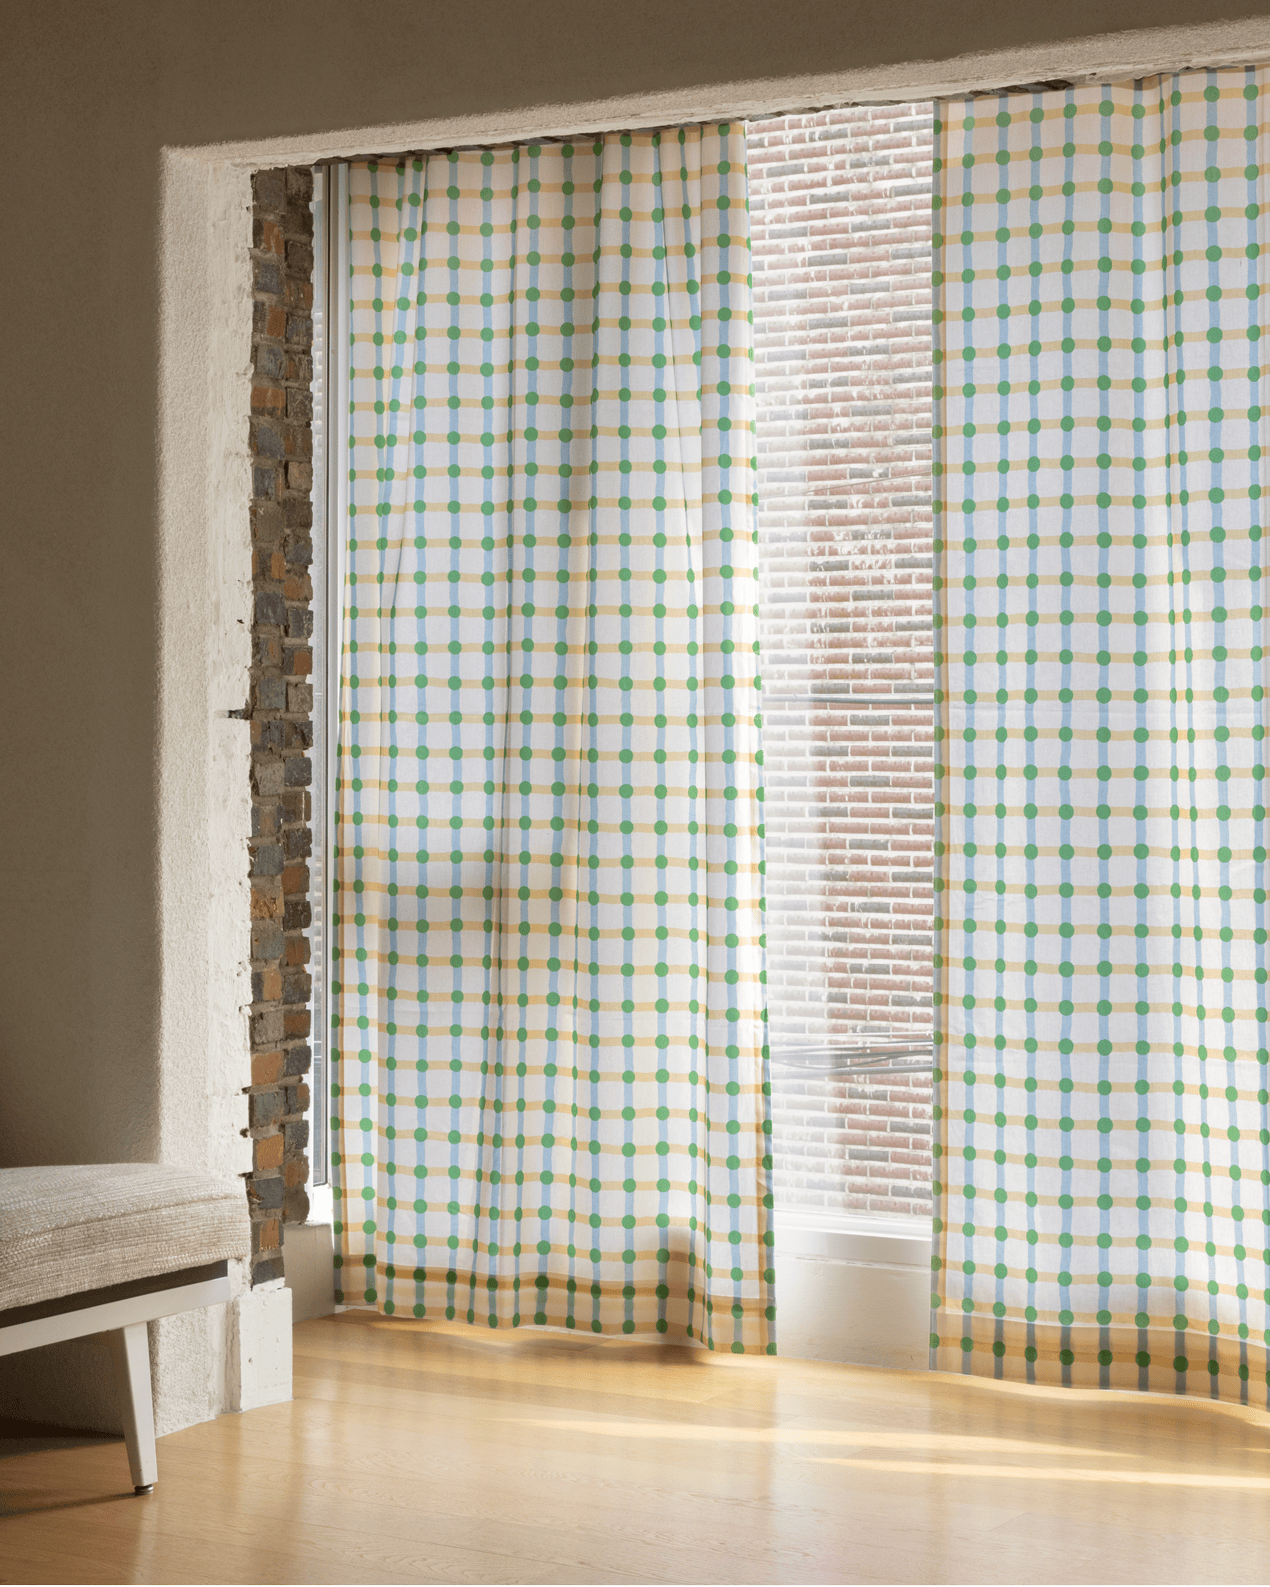 DOT CHECK CURTAIN - GREEN ON BEIGE